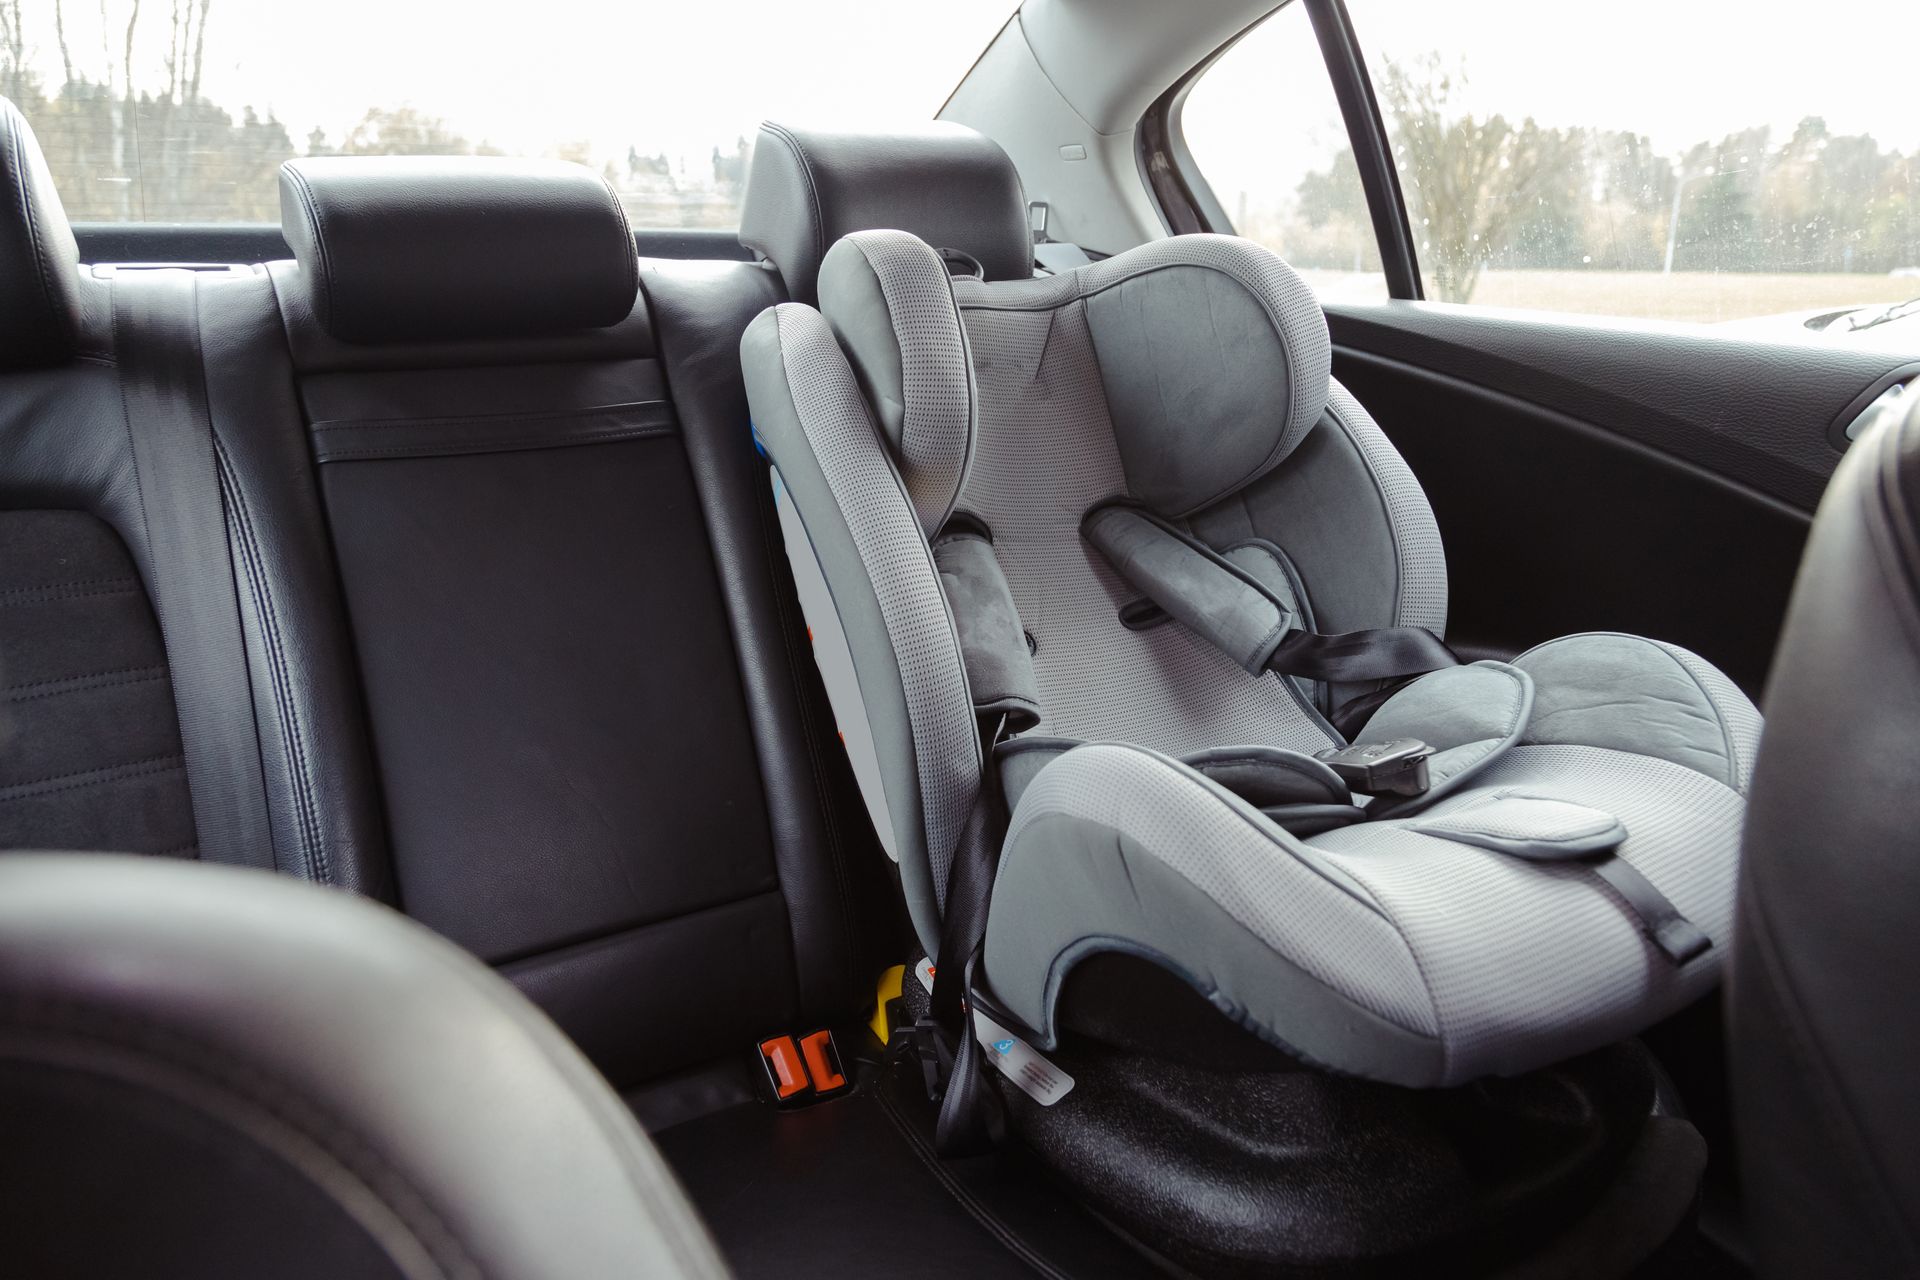 grey car seat in the back of the car that may have defects